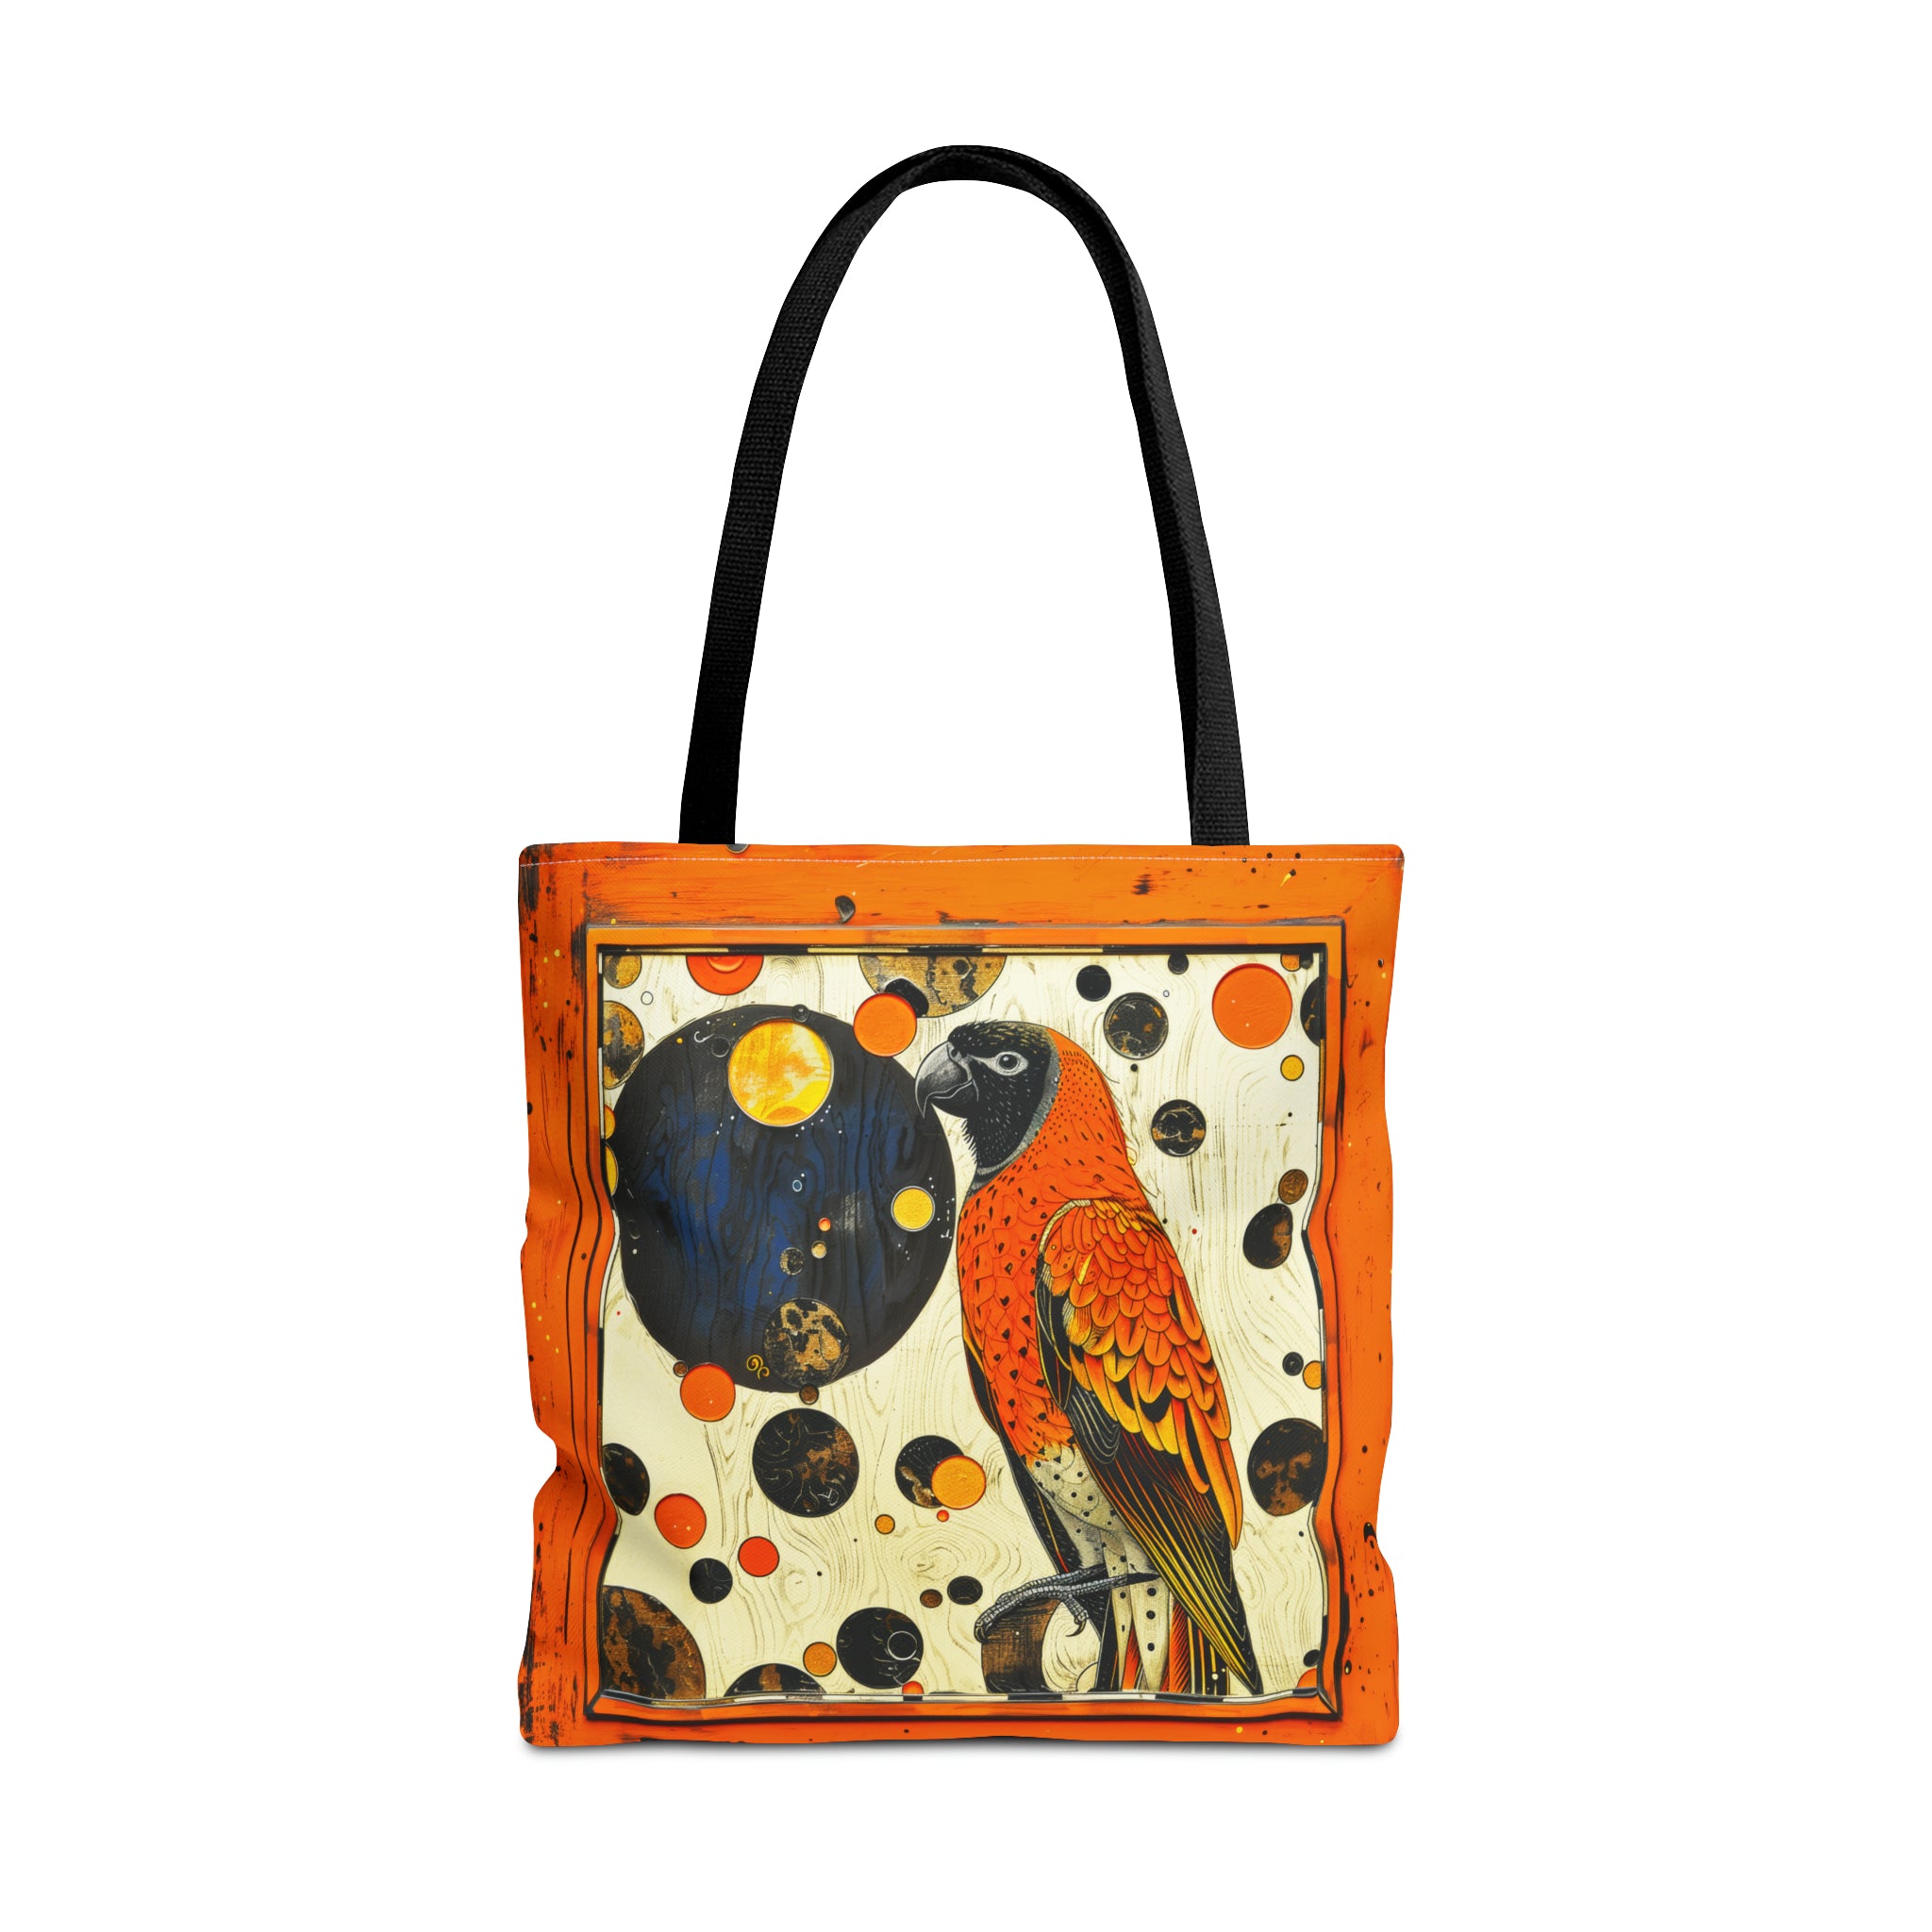 Canvas Tote Bag, vintage inspired bird in an orange frame design, vibrant artistic accessory, whimsical all over print bag in three sizes